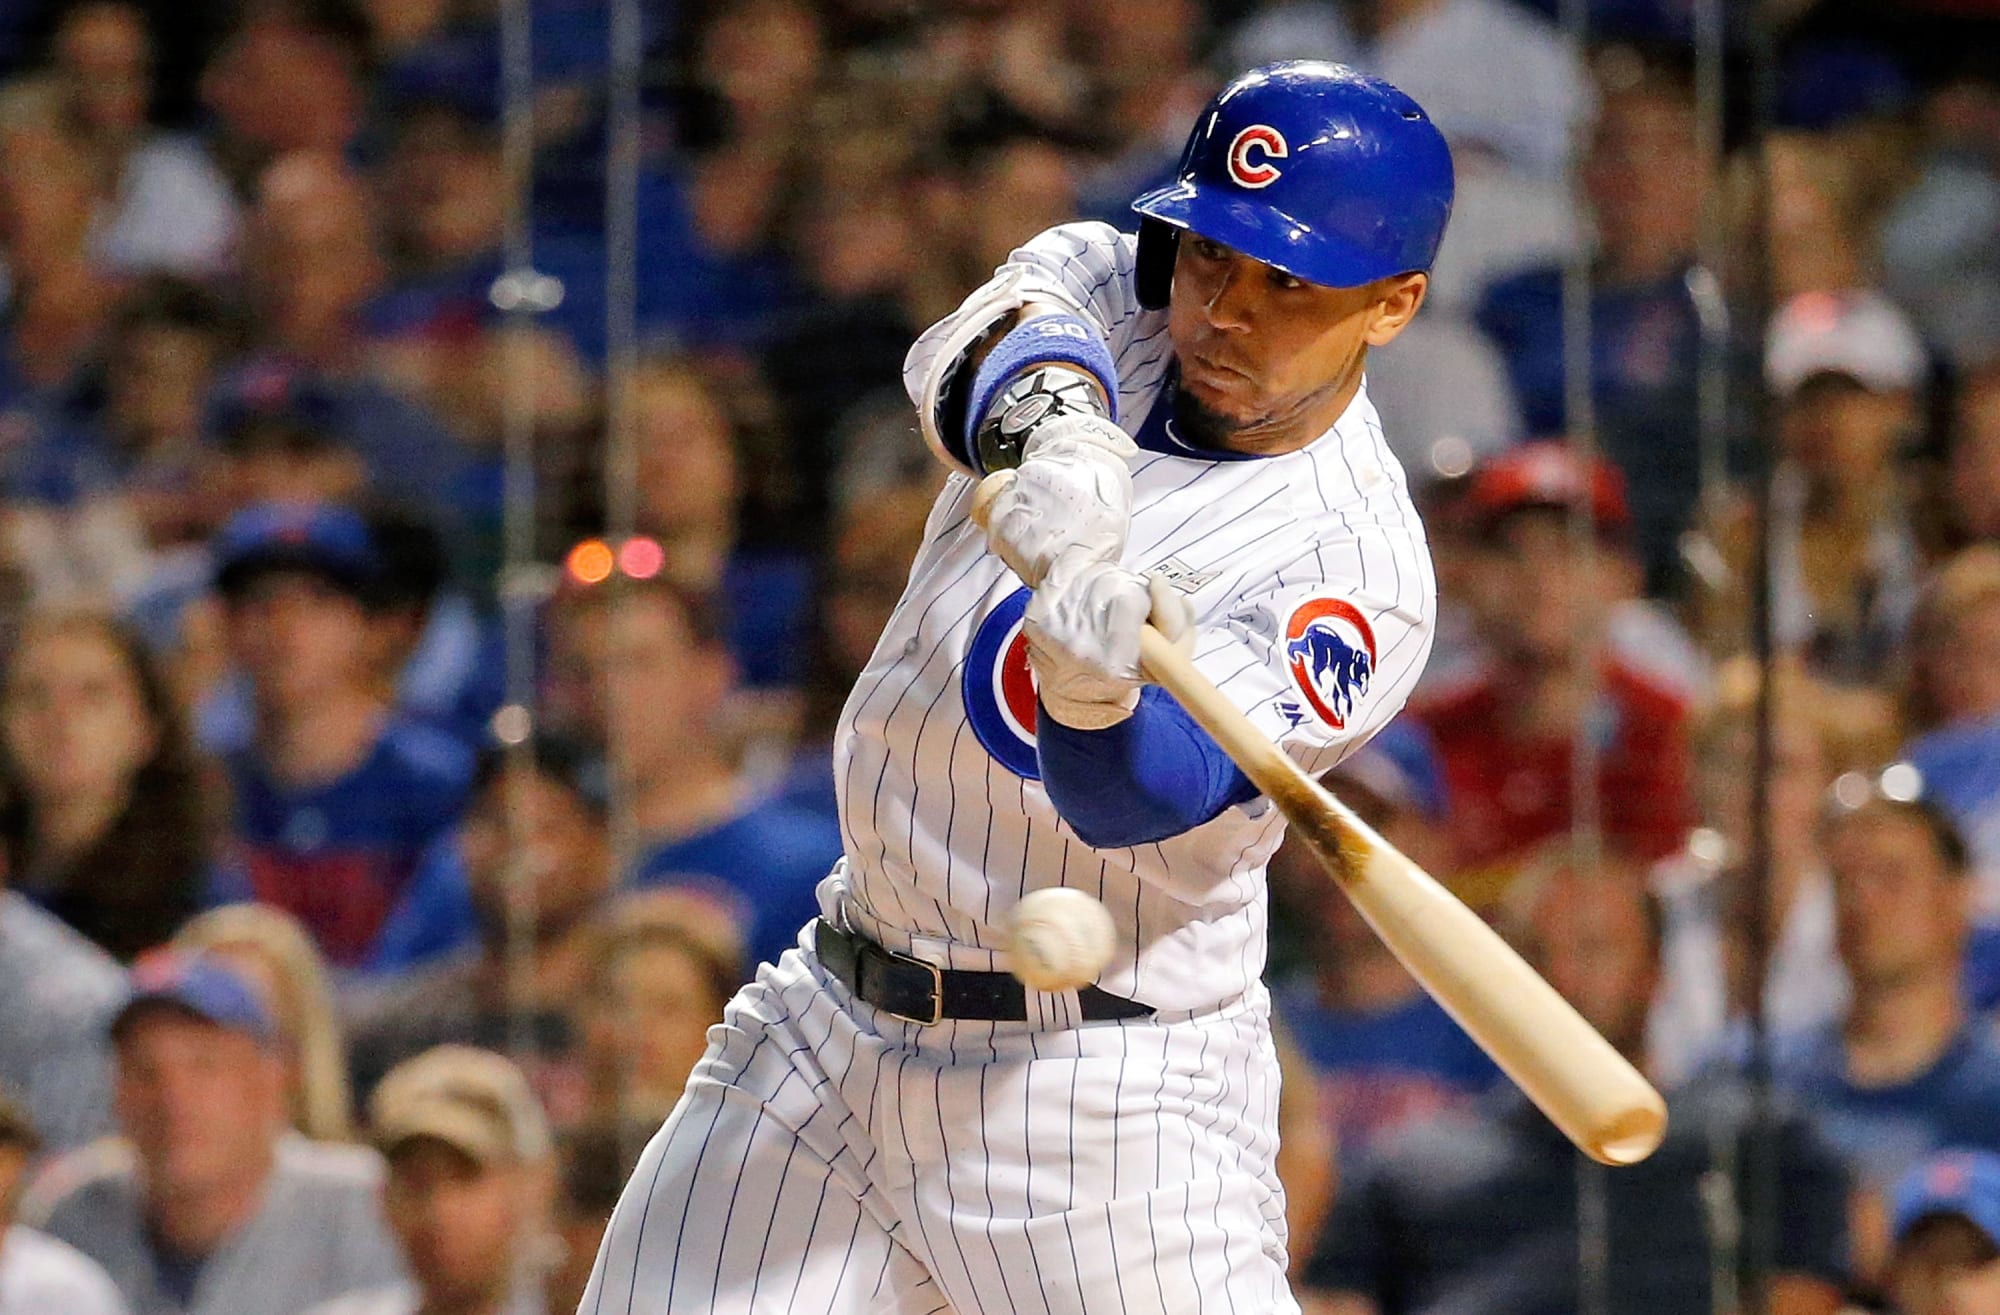 Chicago Cubs lineup vs. Pirates: Jay leads off for strong middle of order